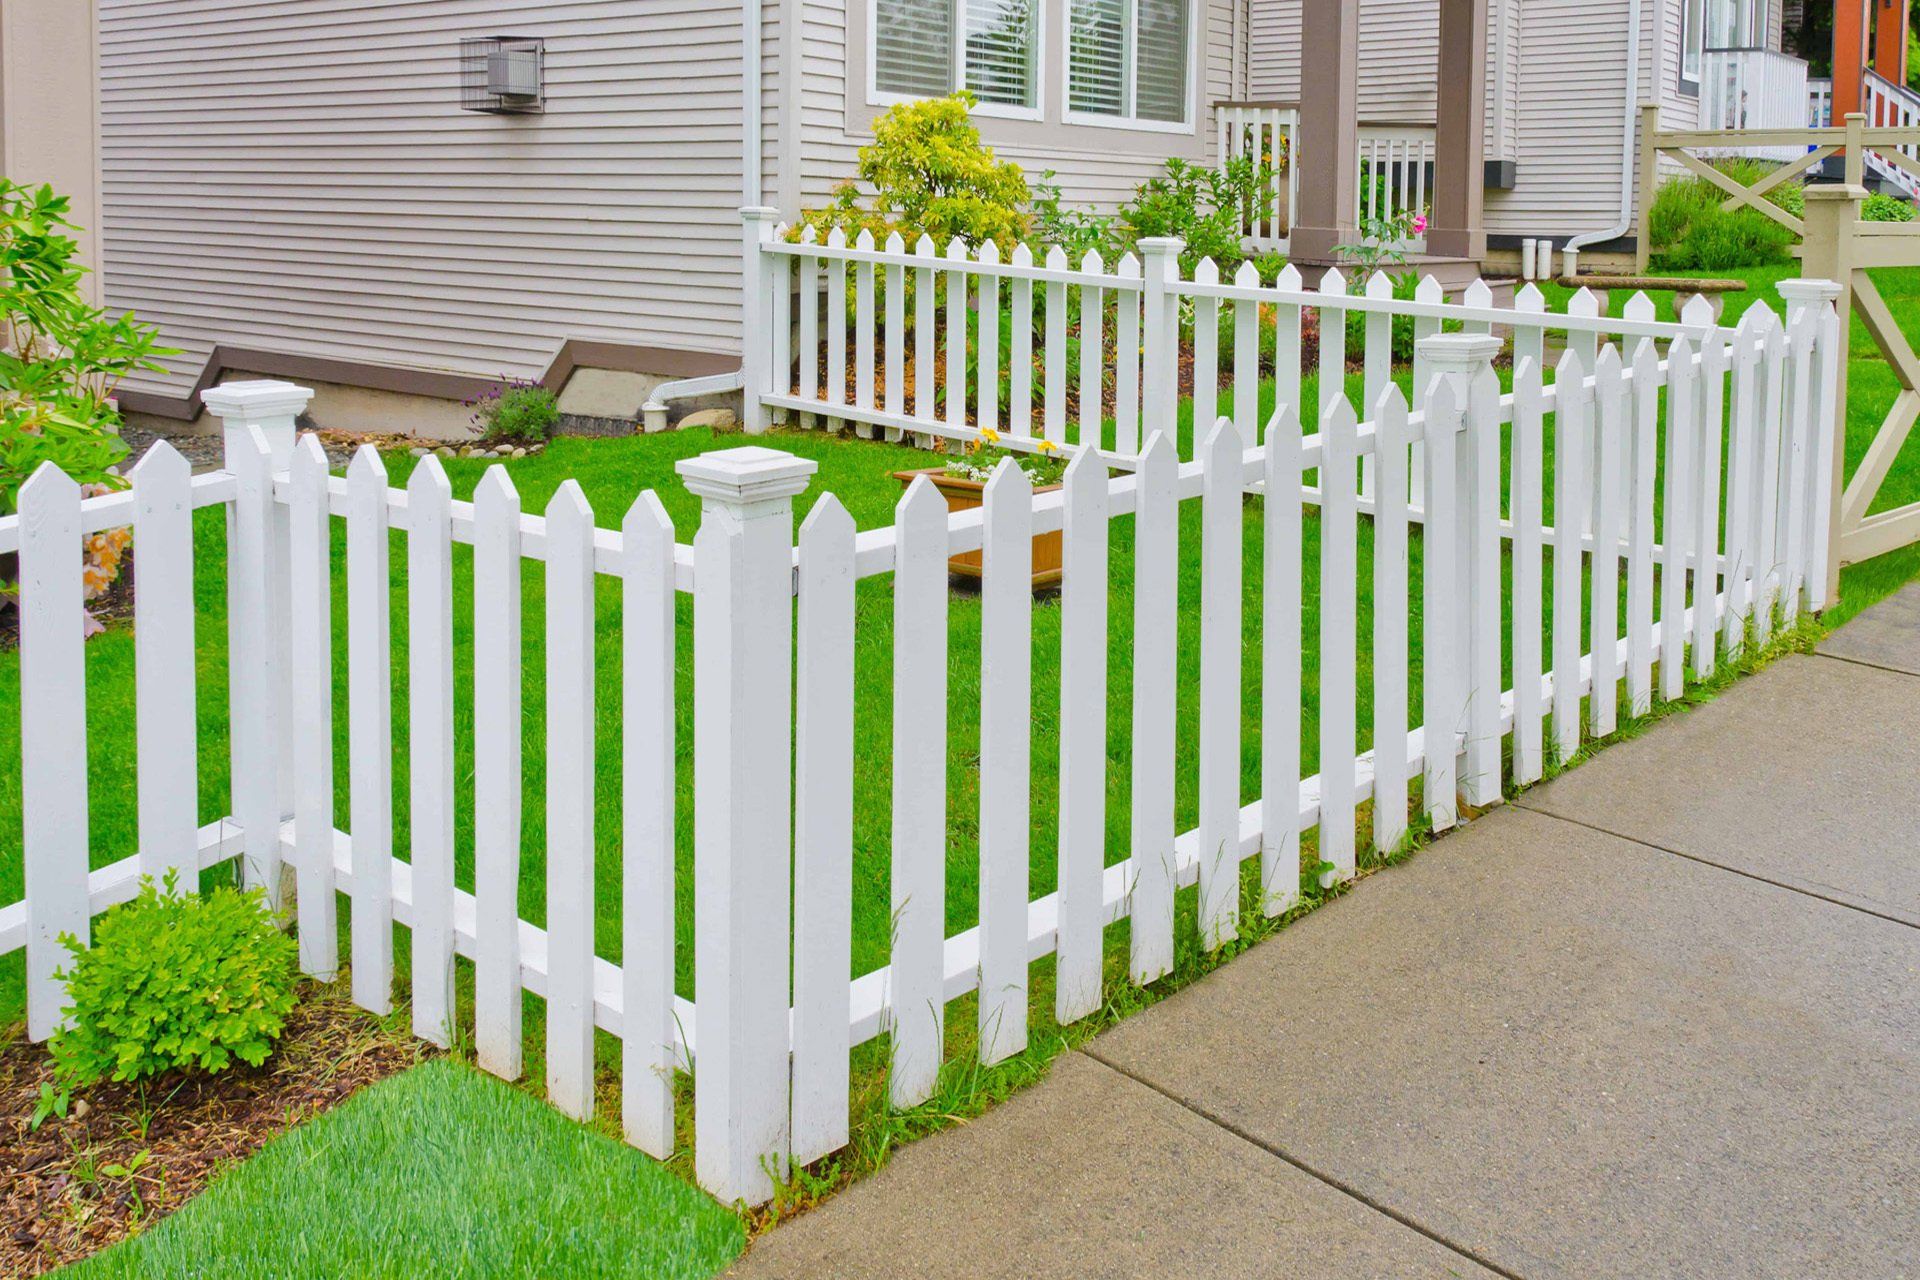 Vinyl fencing is stronger and flexible